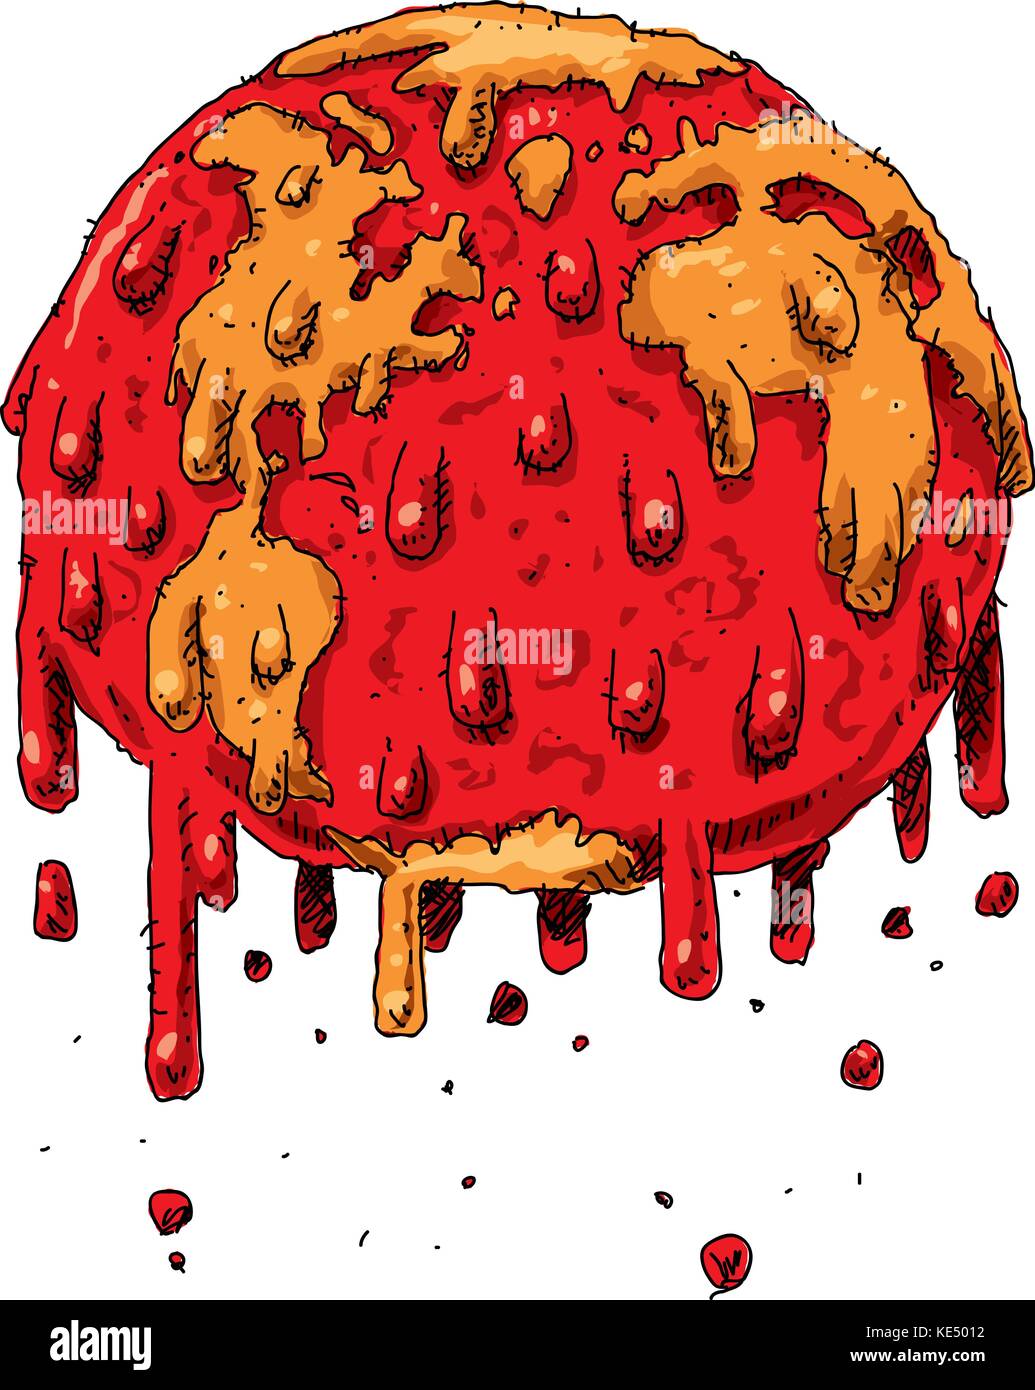 Cartoon of the globe of the Earth dripping and melting because of climate change global warming. Stock Vector